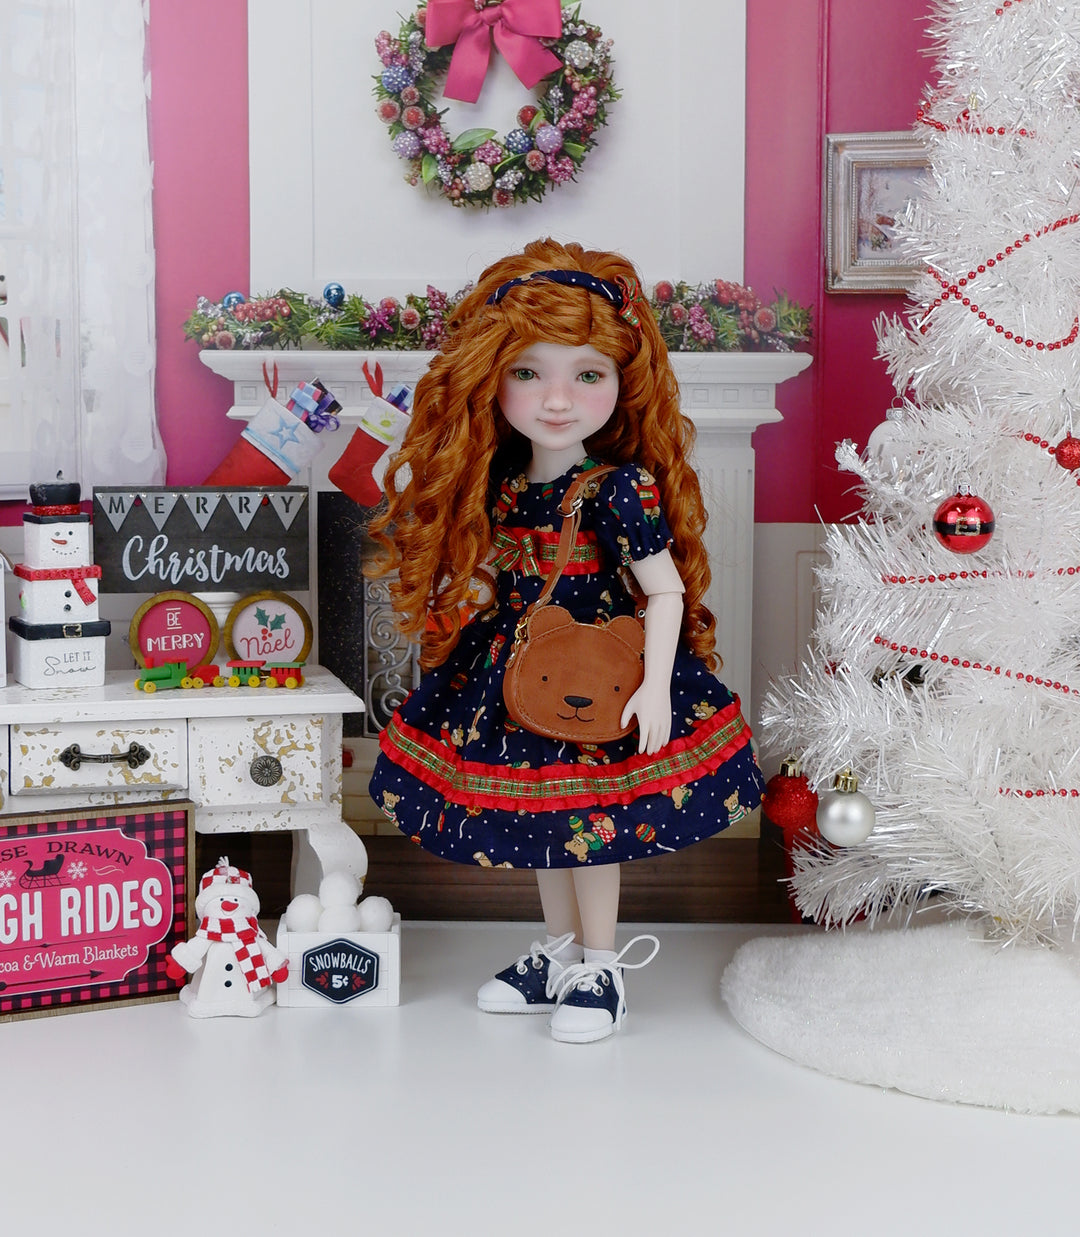 Holiday Teddy - dress with purse and saddle shoes for Ruby Red Fashion Friends doll